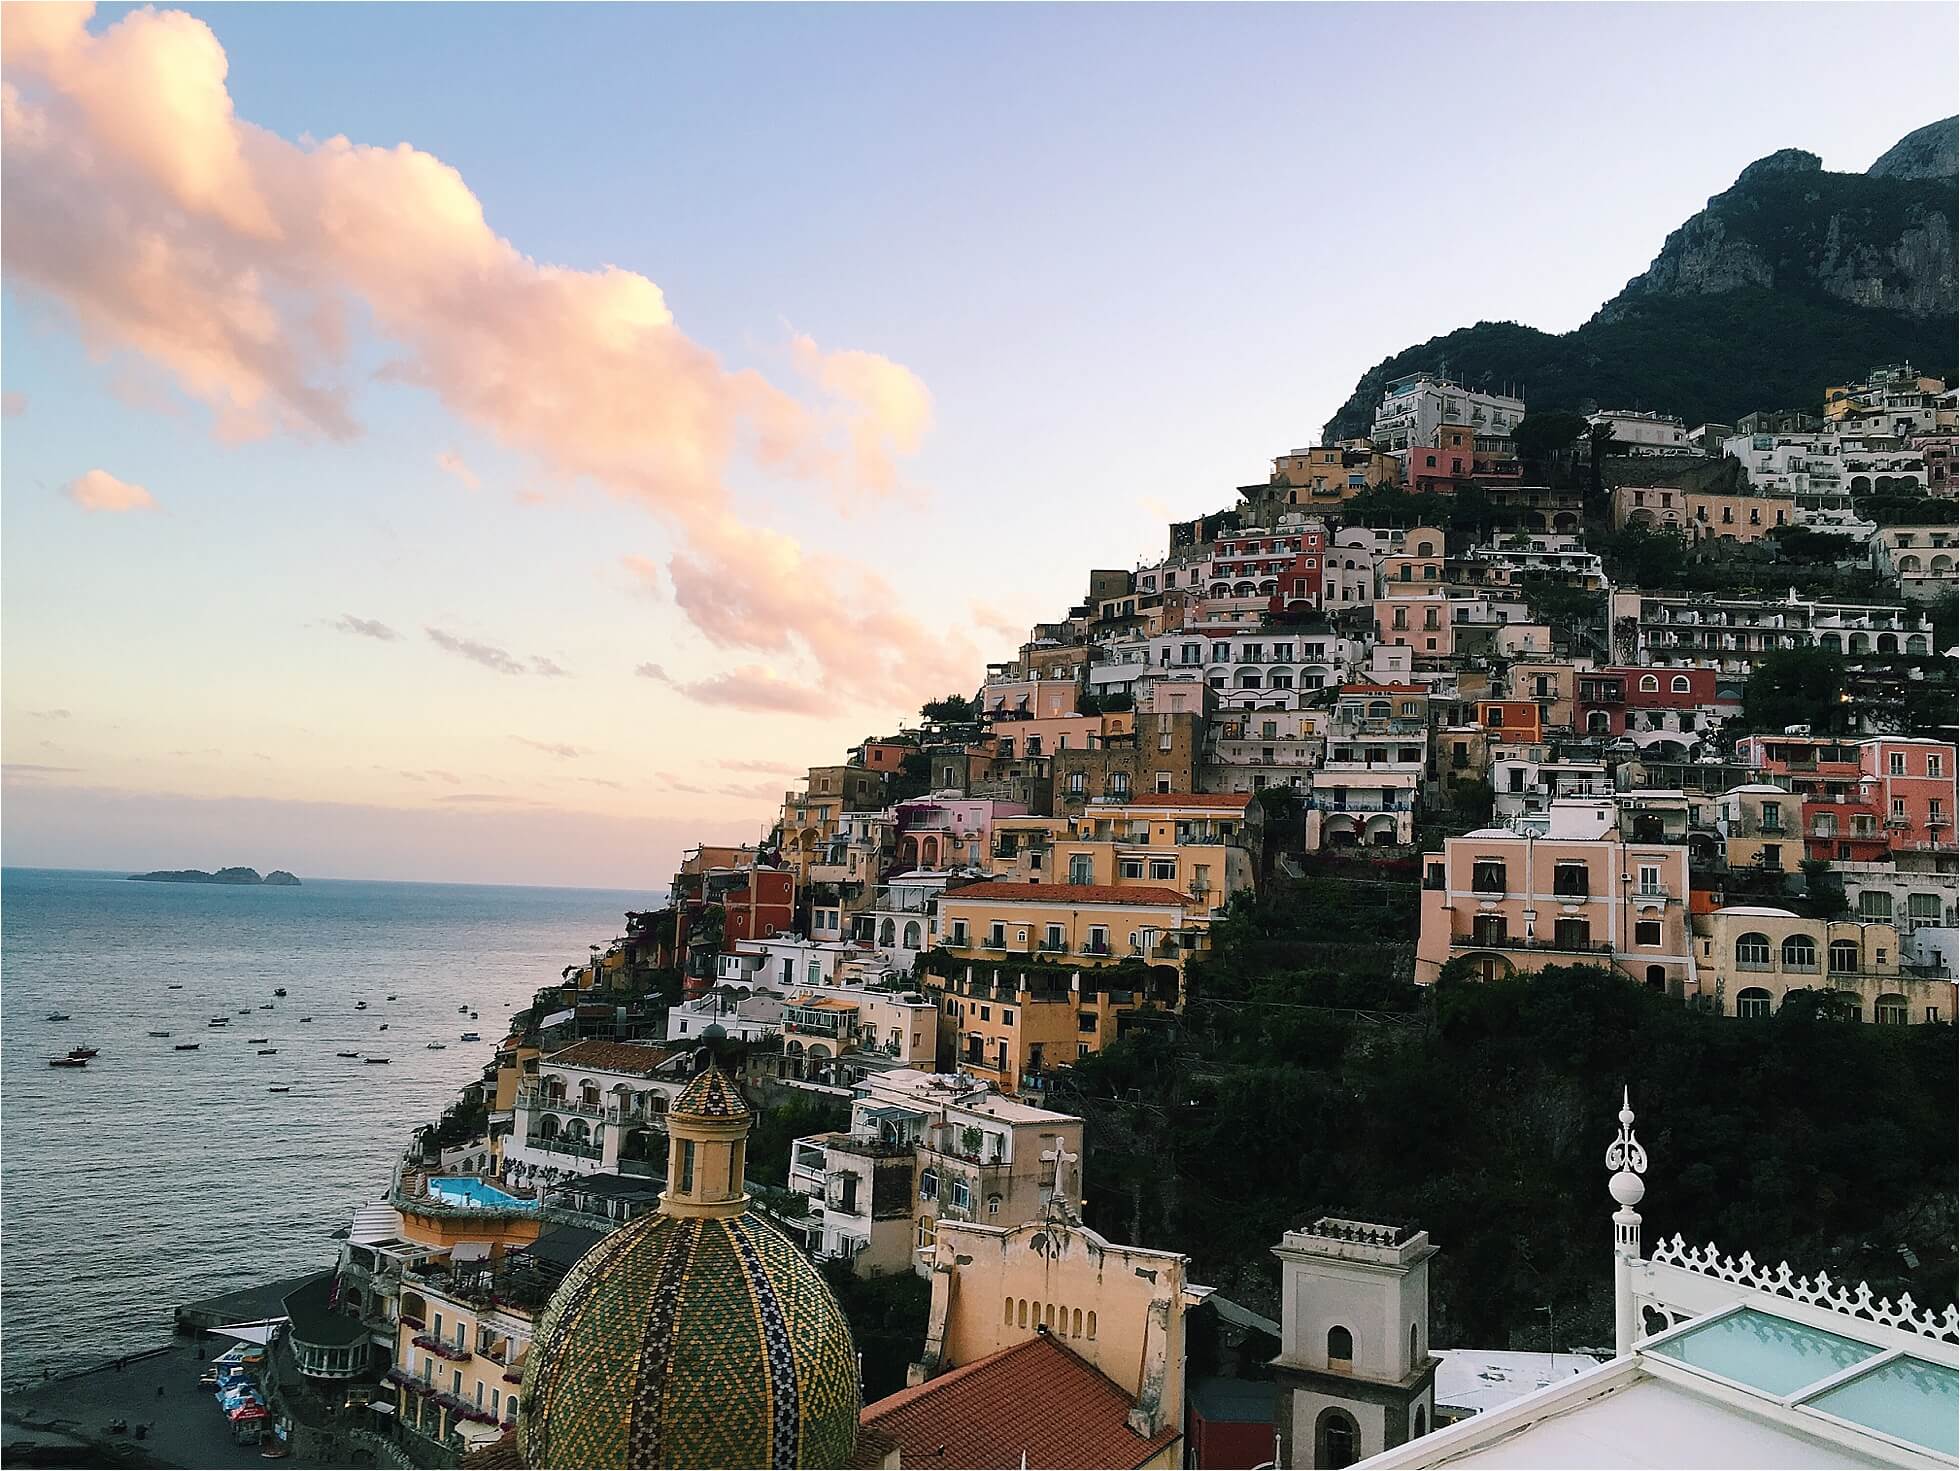 view from hotel le sirenuse champagne bar in positano // best places to grab a glass of wine with a view via brighton the day blog